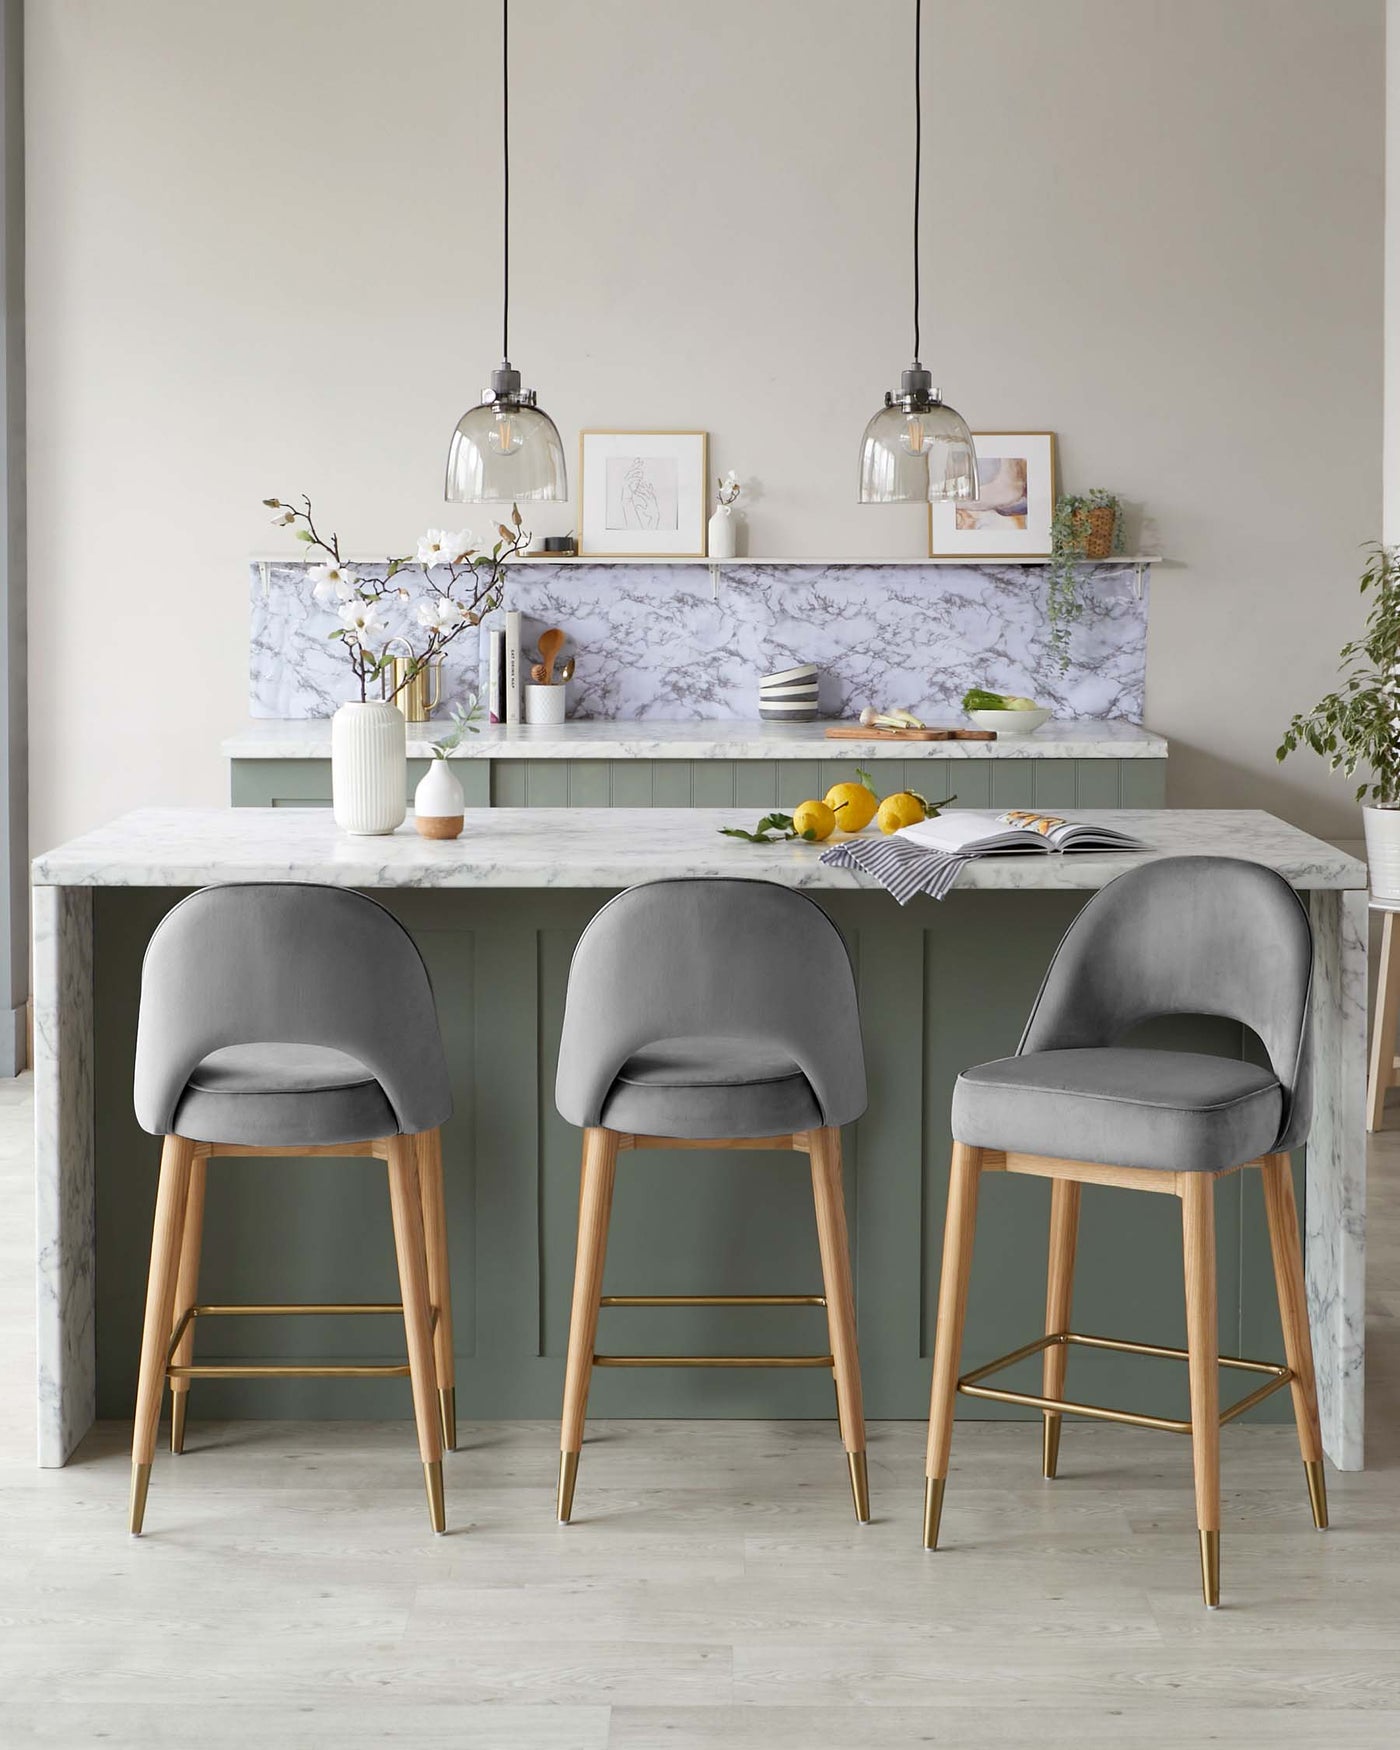 Three modern grey upholstered bar stools with backrest and wooden legs accented with gold tips are positioned at a kitchen island with a marble countertop.